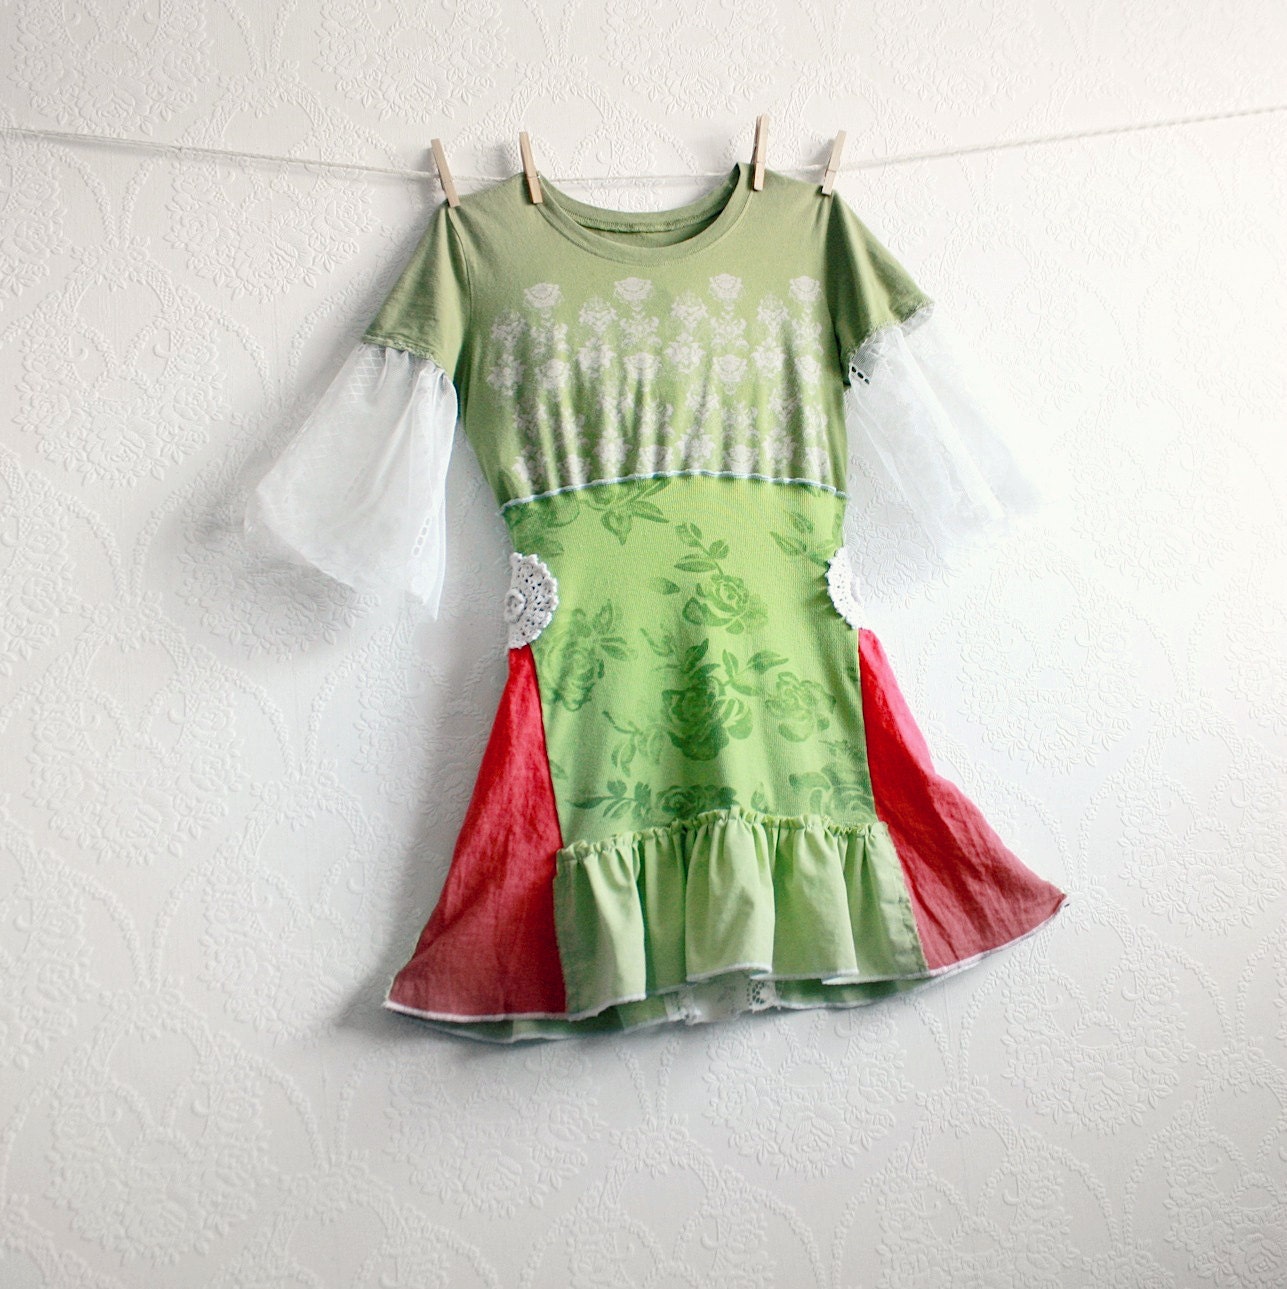 Lime Green  Women s Top Bohemian Clothing  Upcycled Clothes 